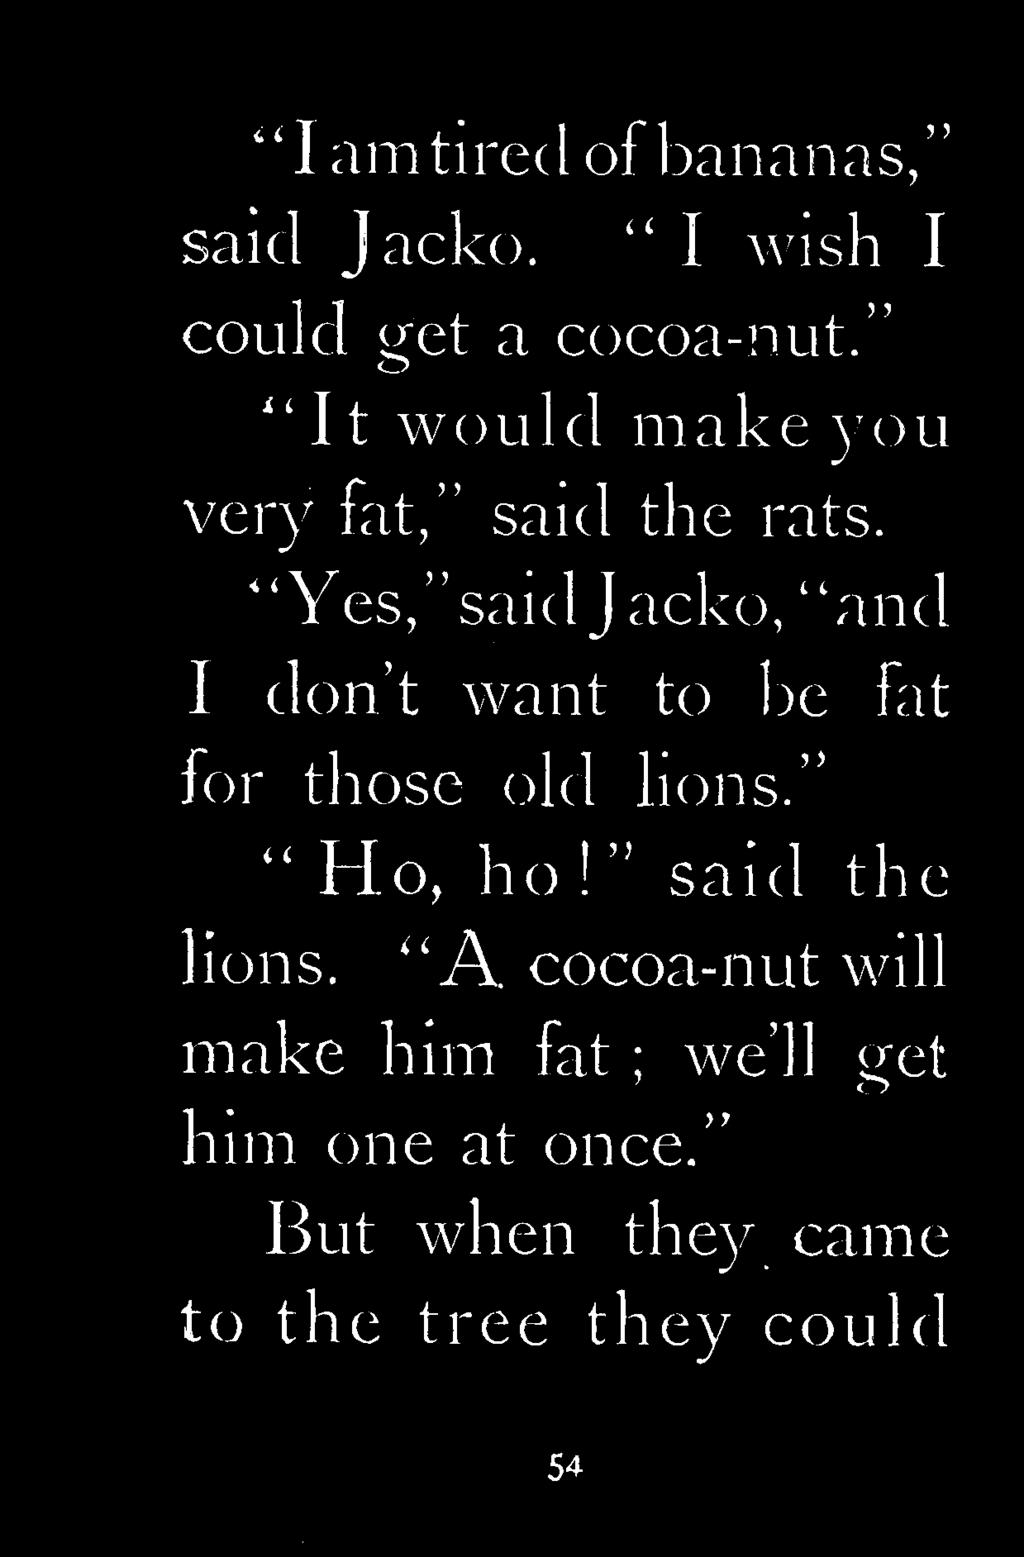 Yes, said Jacko, and I don t want to be fat for those old lions. Ho, ho!